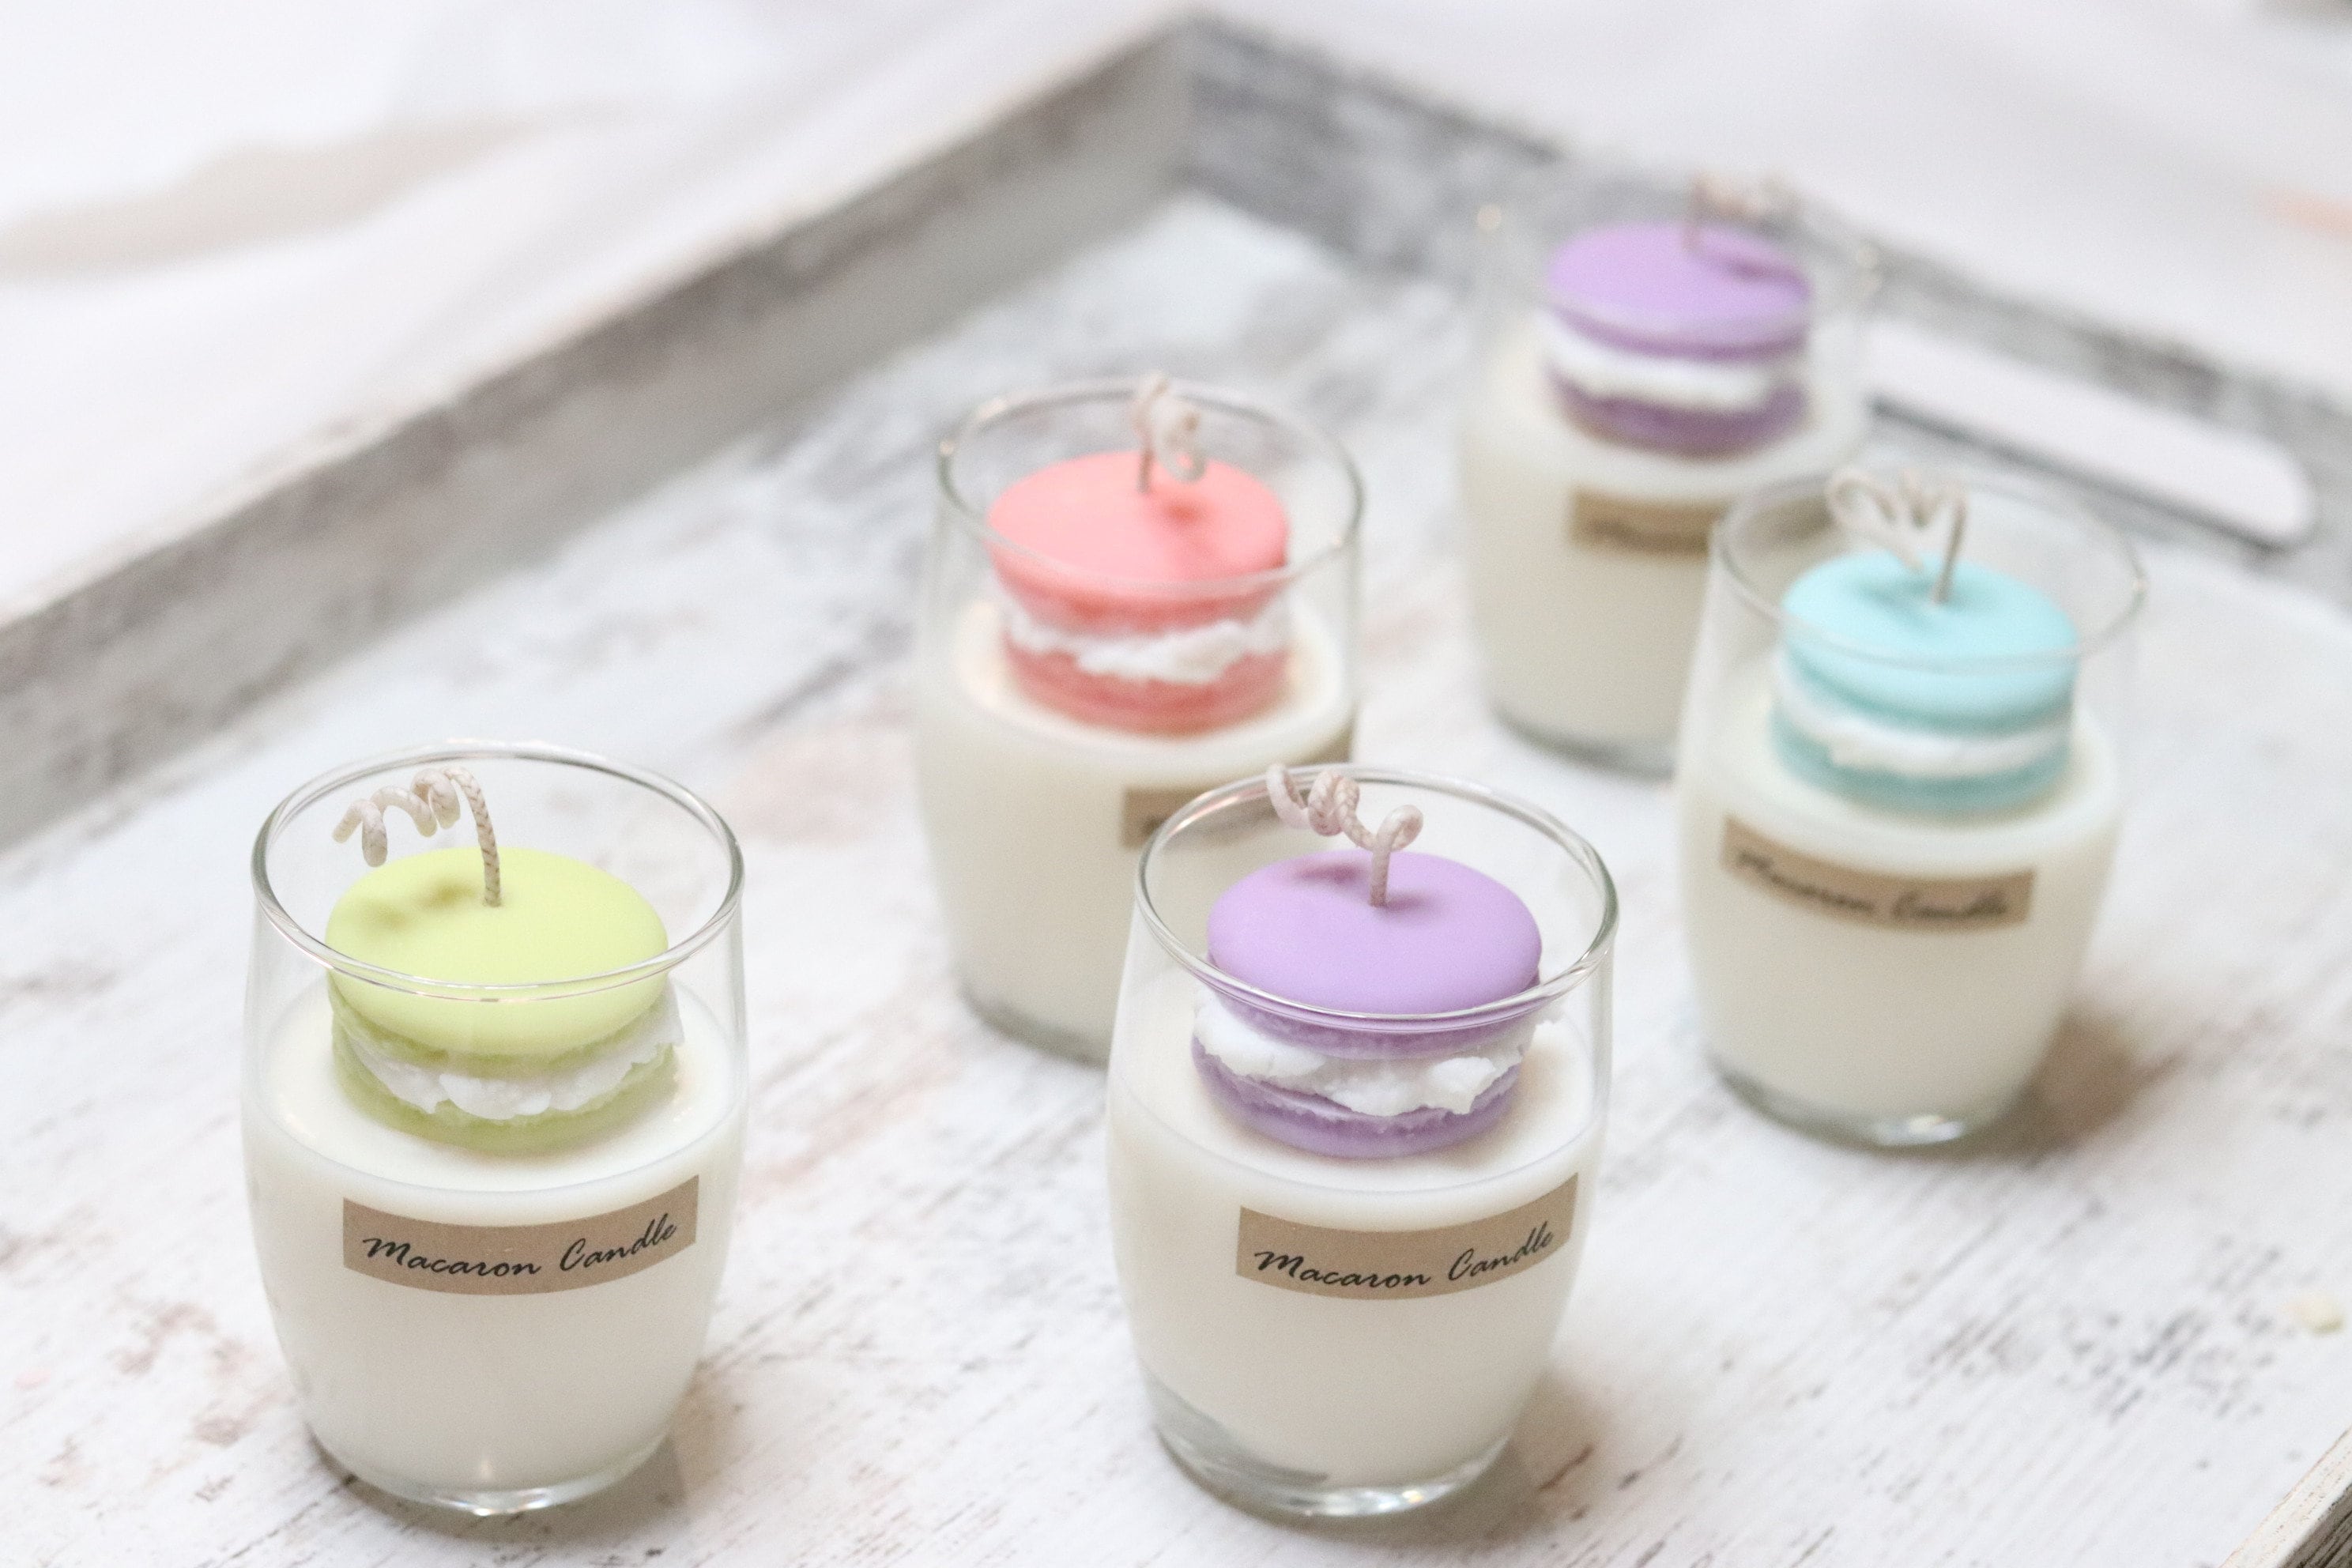 50 Macaron candles/tealight candle/Costume Sticker/wedding candle/dessert candle/decorative/home decor/home fragrance / 